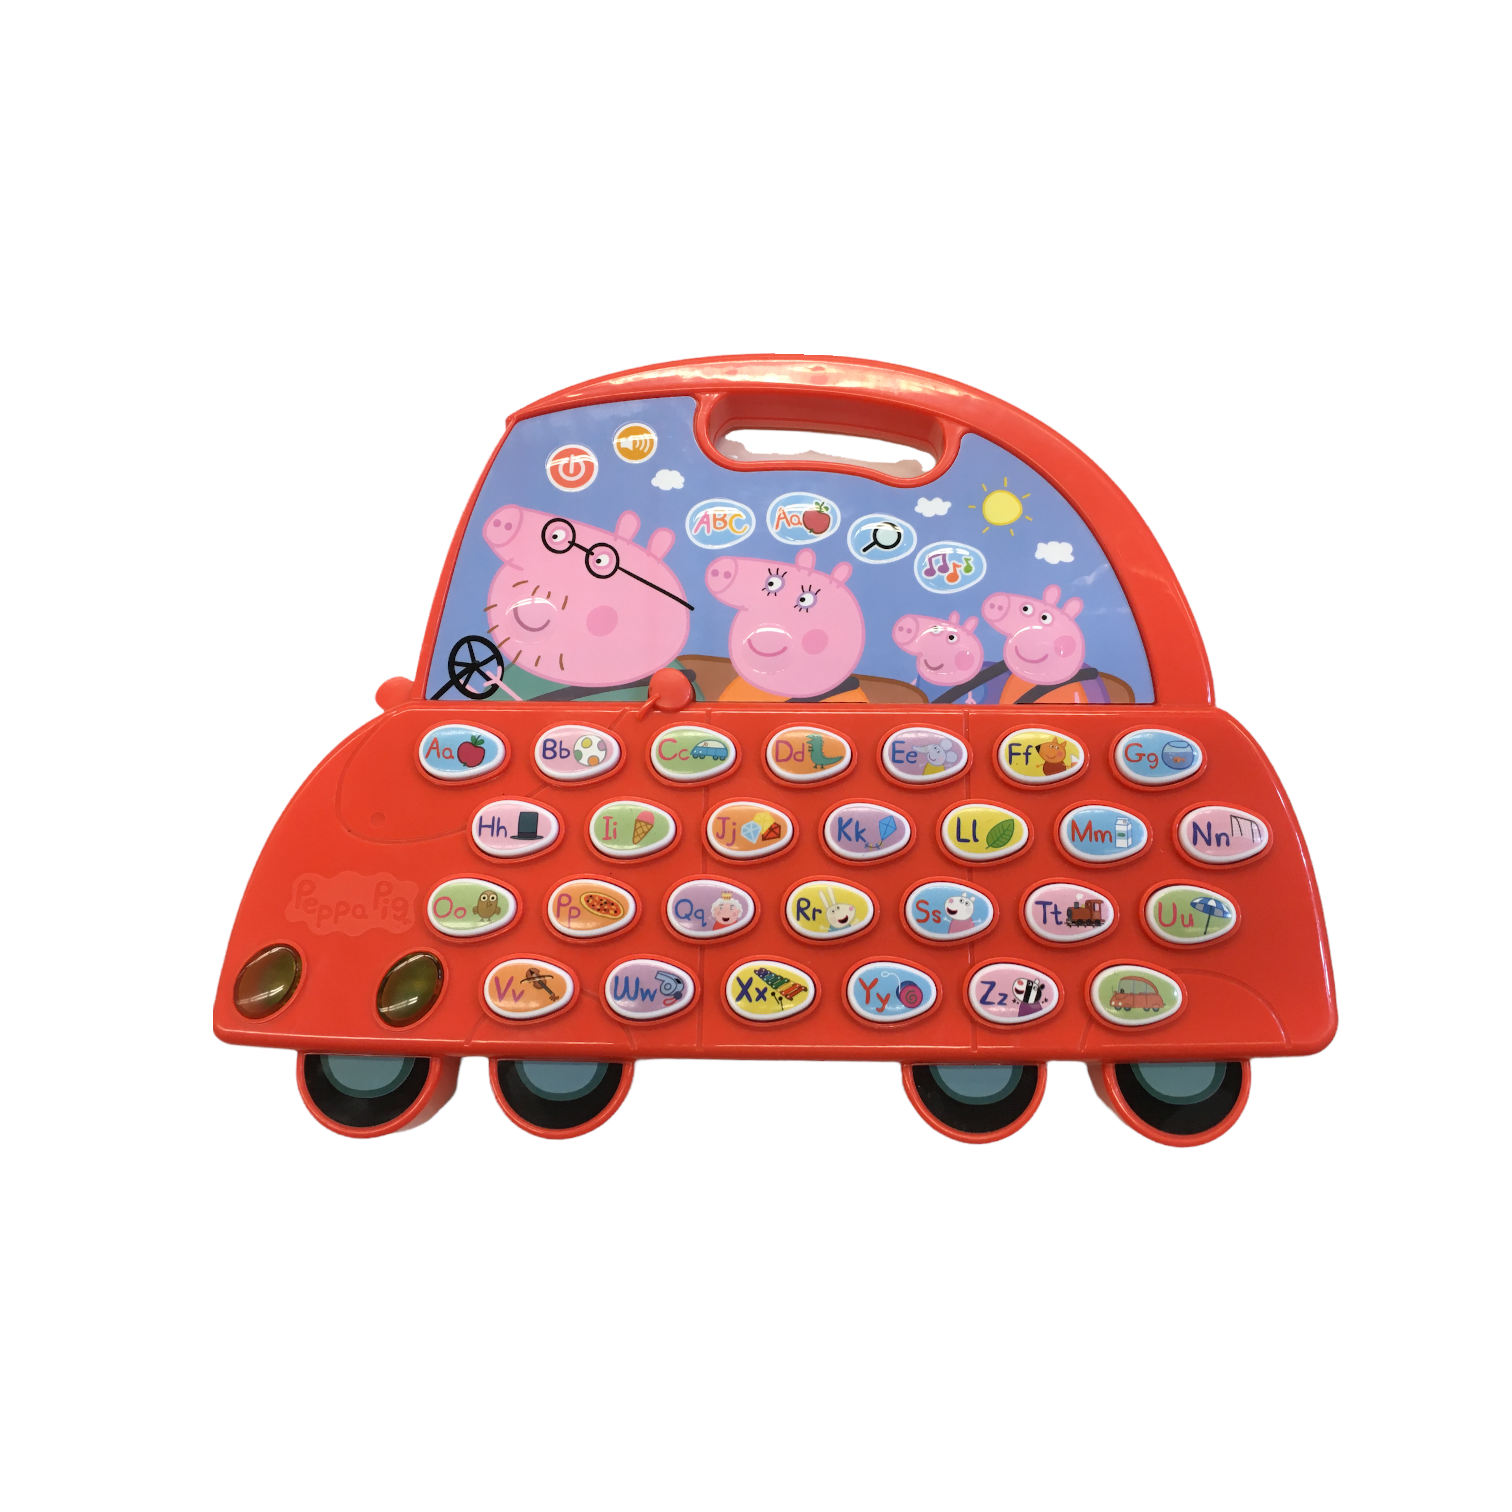 Learn & Go ABC (Peppa), Toys

#resalerocks #pipsqueakresale #vancouverwa #portland #reusereducerecycle #fashiononabudget #chooseused #consignment #savemoney #shoplocal #weship #keepusopen #shoplocalonline #resale #resaleboutique #mommyandme #minime #fashion #reseller                                                                                                                                      Cross posted, items are located at #PipsqueakResaleBoutique, payments accepted: cash, paypal & credit cards. Any flaws will be described in the comments. More pictures available with link above. Local pick up available at the #VancouverMall, tax will be added (not included in price), shipping available (not included in price, *Clothing, shoes, books & DVDs for $6.99; please contact regarding shipment of toys or other larger items), item can be placed on hold with communication, message with any questions. Join Pipsqueak Resale - Online to see all the new items! Follow us on IG @pipsqueakresale & Thanks for looking! Due to the nature of consignment, any known flaws will be described; ALL SHIPPED SALES ARE FINAL. All items are currently located inside Pipsqueak Resale Boutique as a store front items purchased on location before items are prepared for shipment will be refunded.